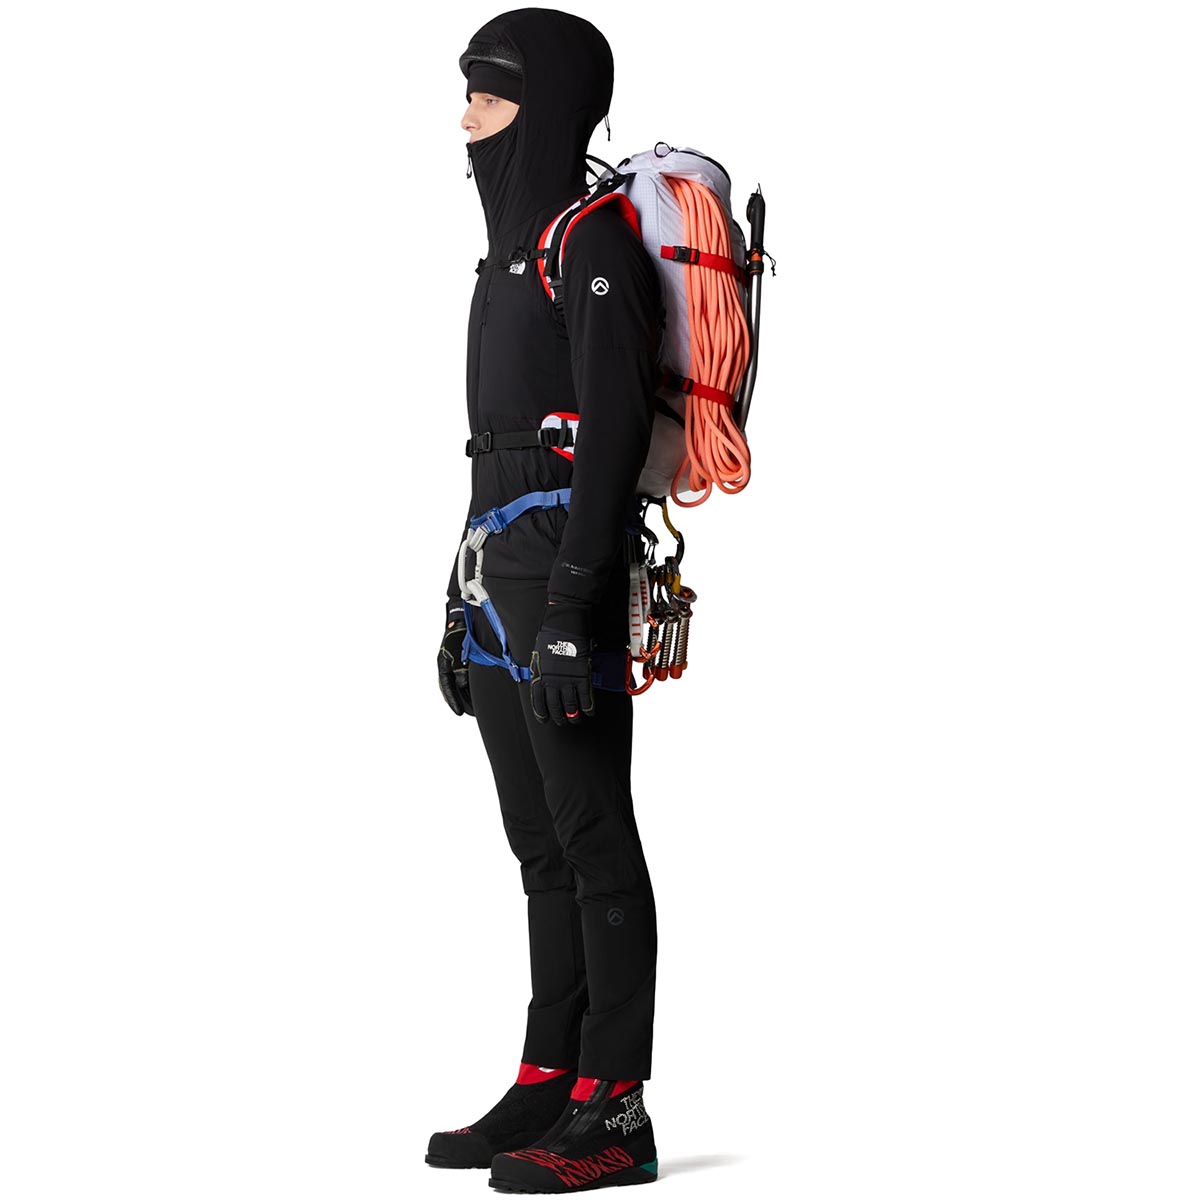 THE NORTH FACE - SUMMIT OFF WIDTH TROUSERS